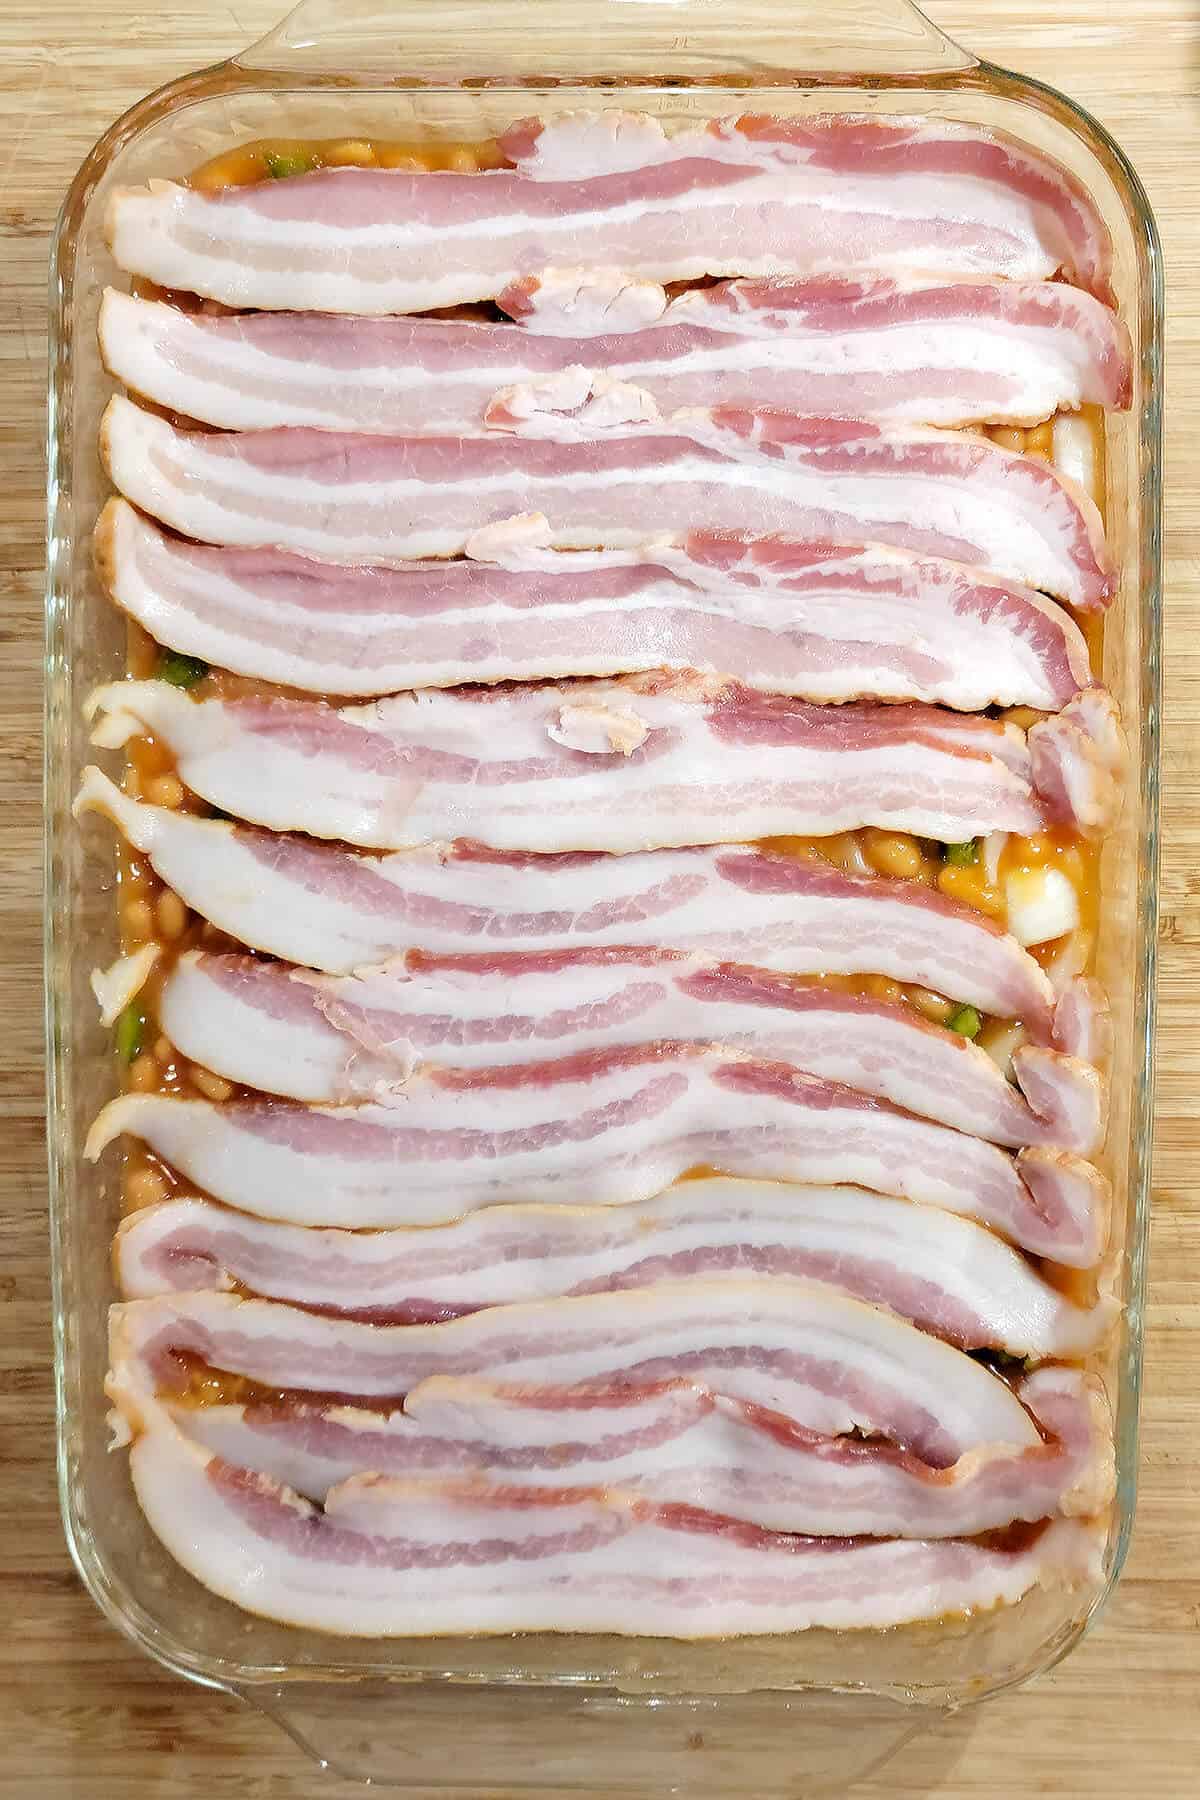 Bacon added to top of beans in a baking dish.